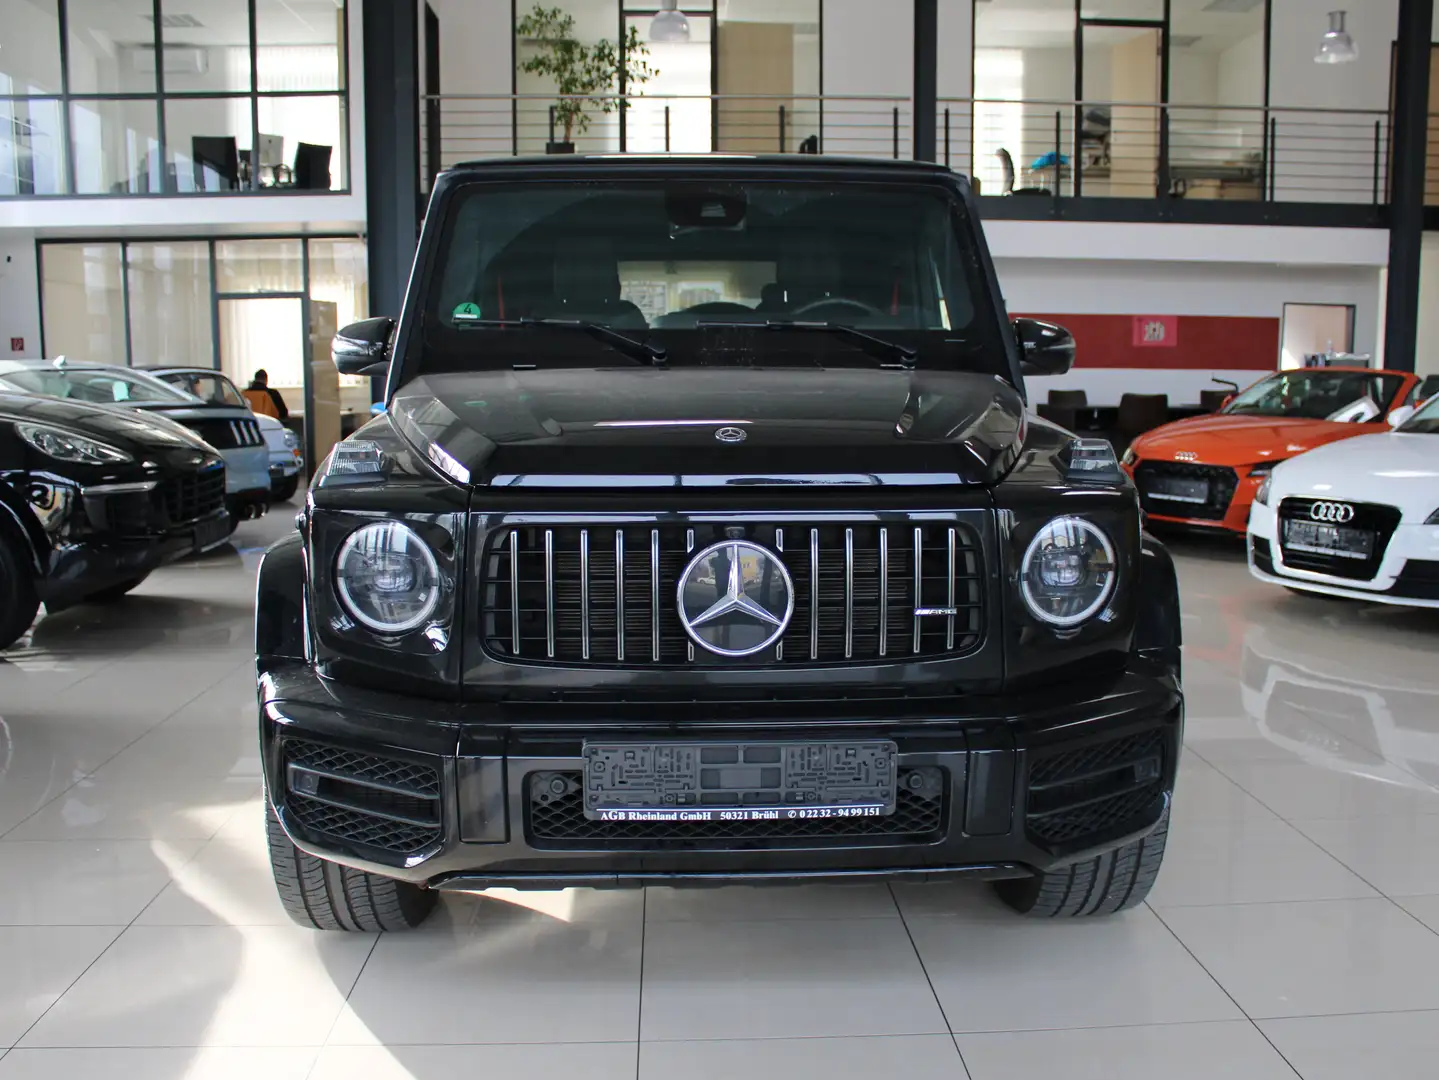 Mercedes-Benz G 63 AMG NEUES MODELL 585PS DRIVERS BRABUS CARBON ALU22 TOP Black - 1